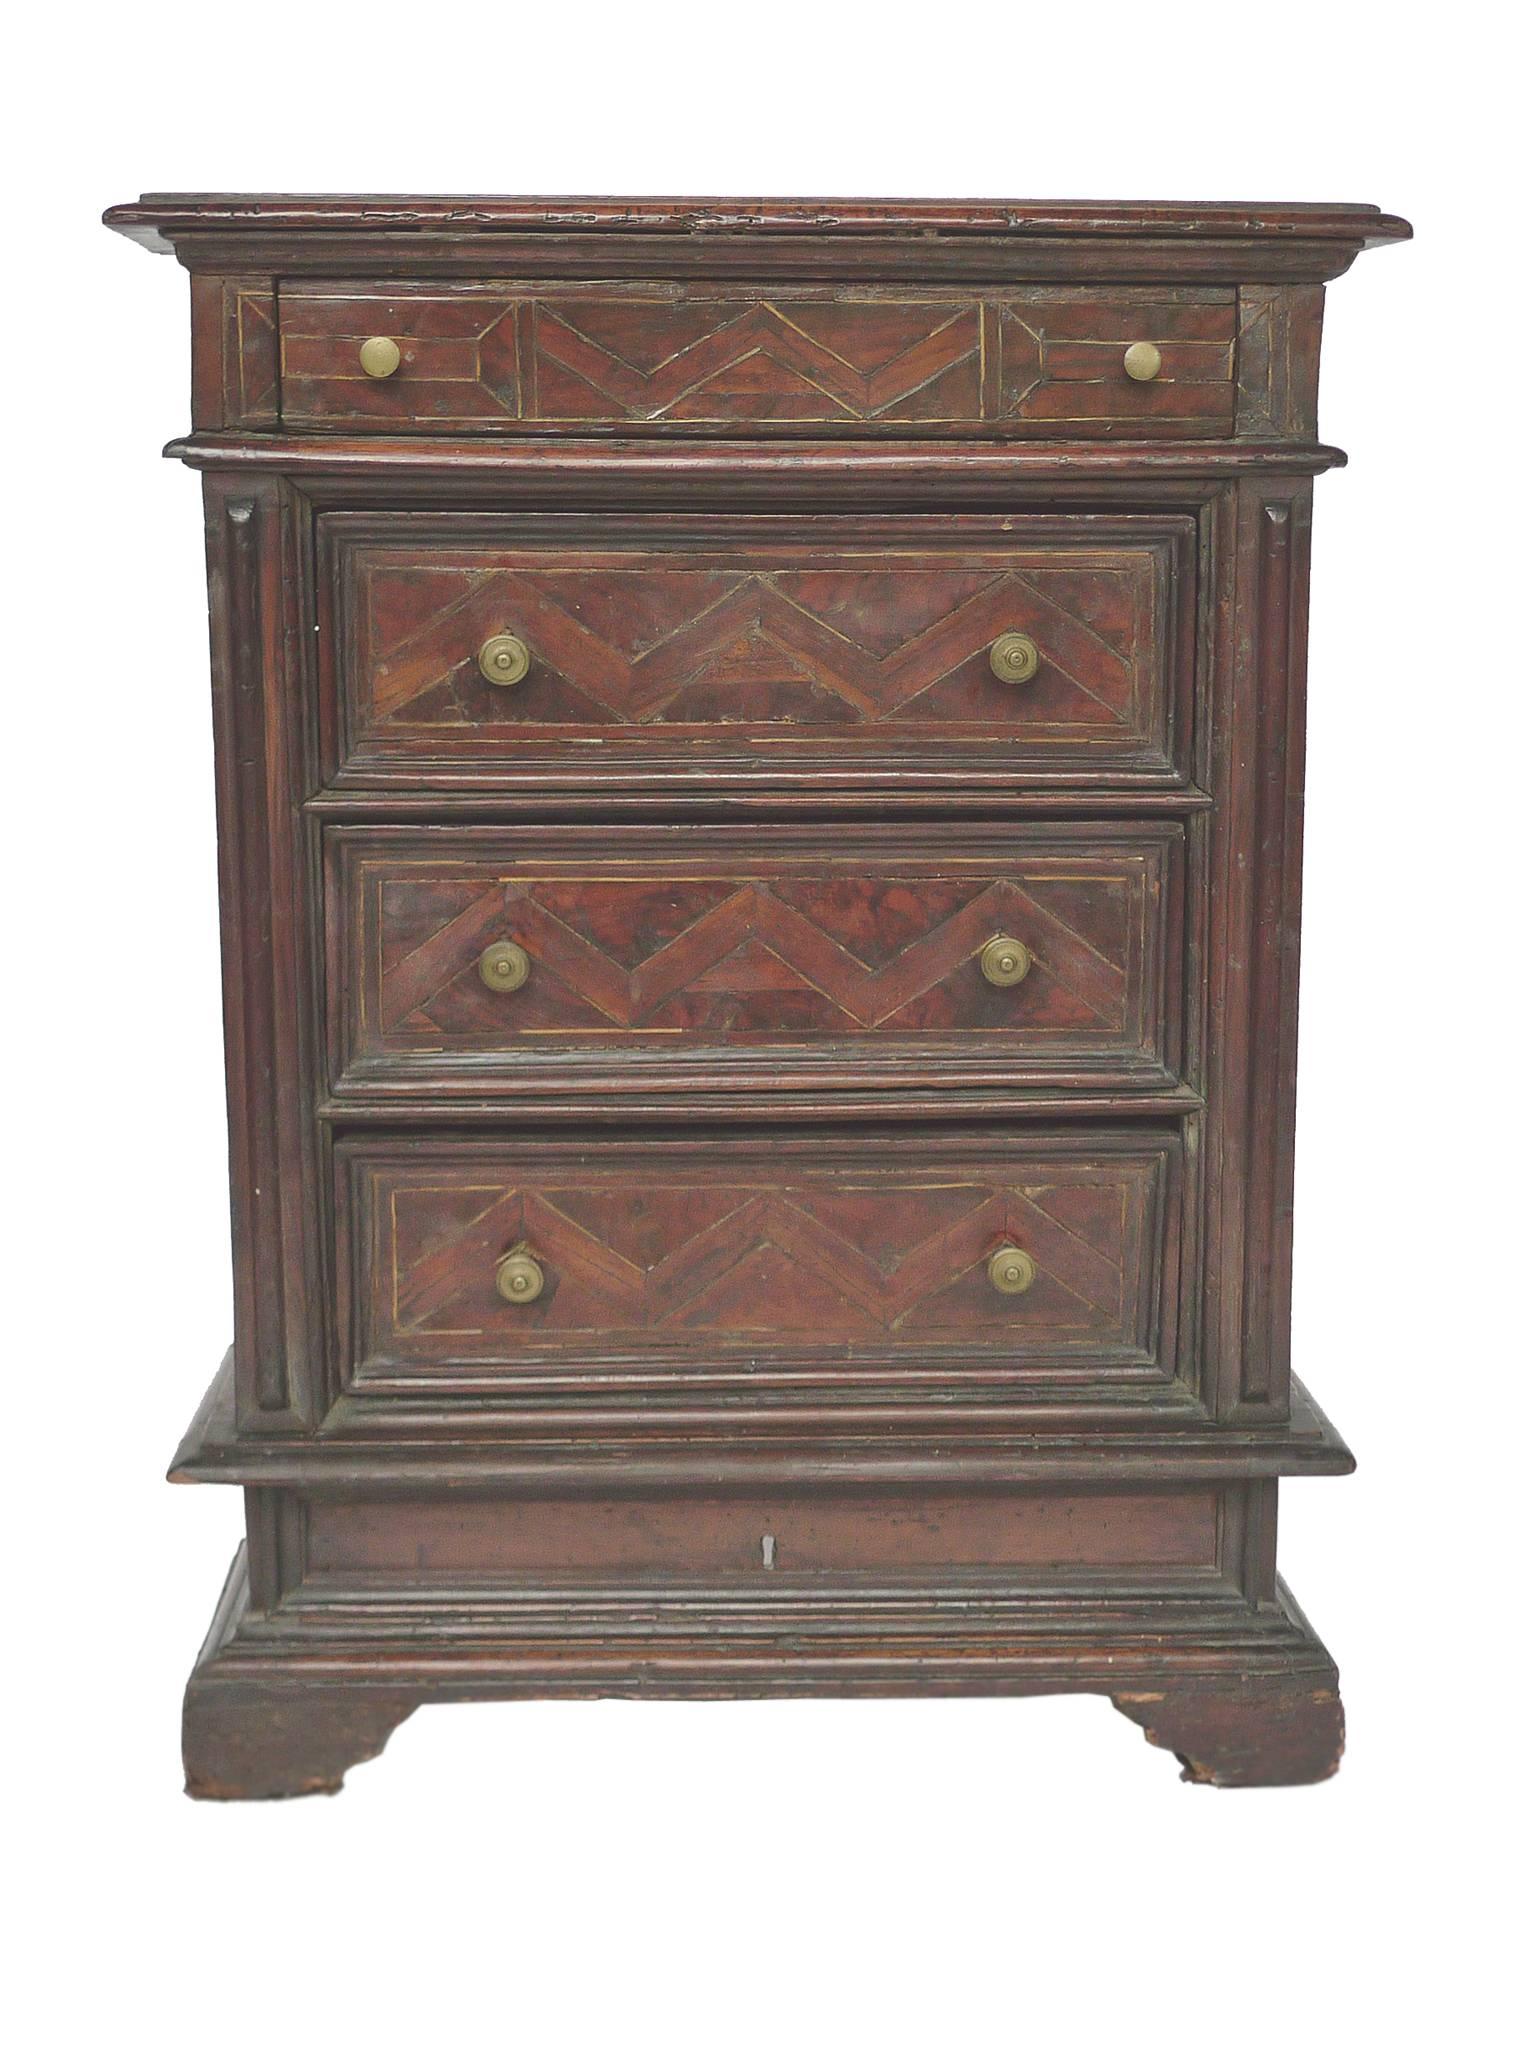 Baroque Early 18th Century Italian Four-Drawer Cabinet with Bone Inlays